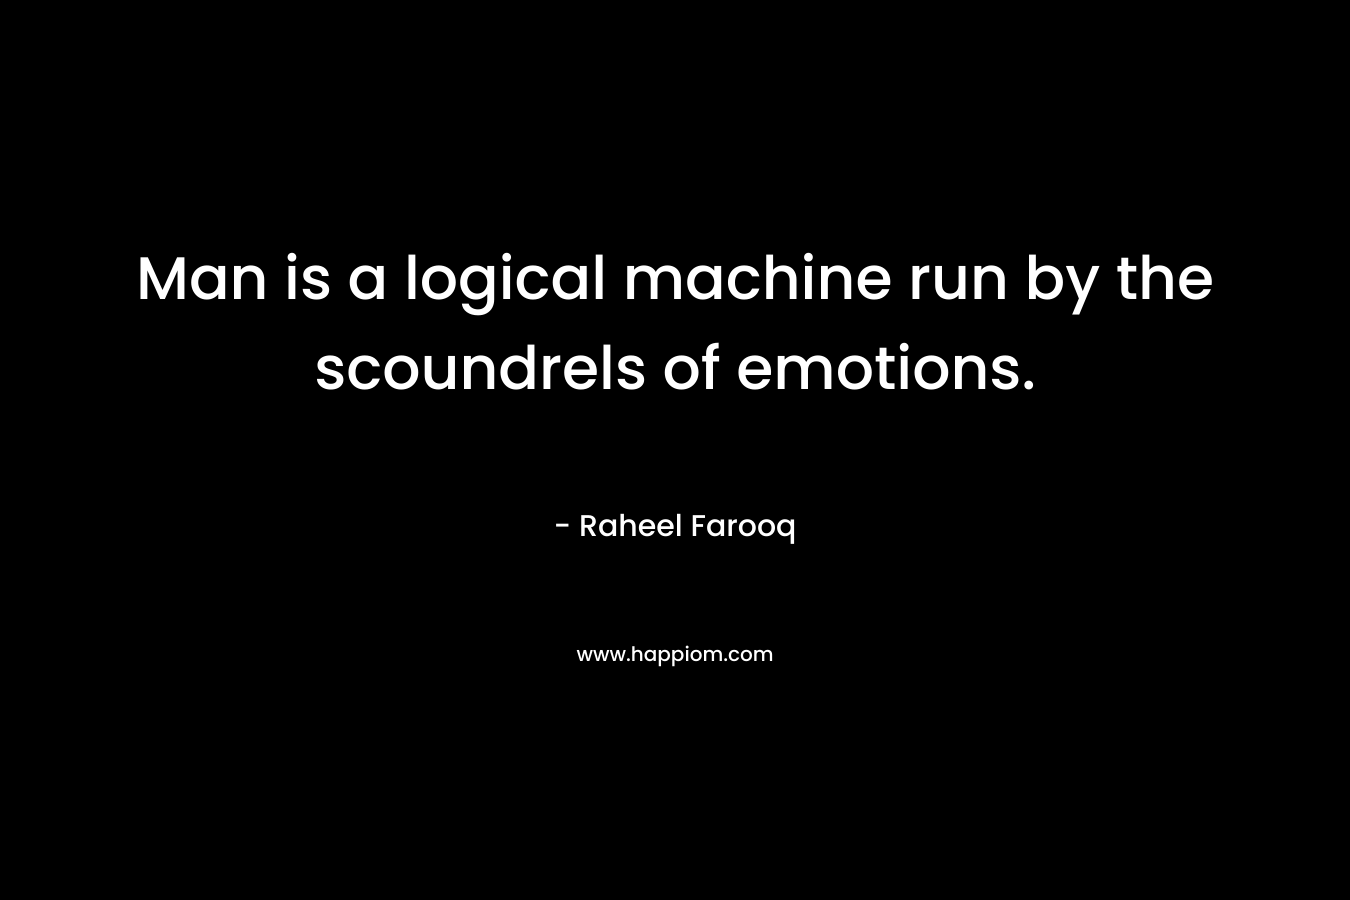 Man is a logical machine run by the scoundrels of emotions.